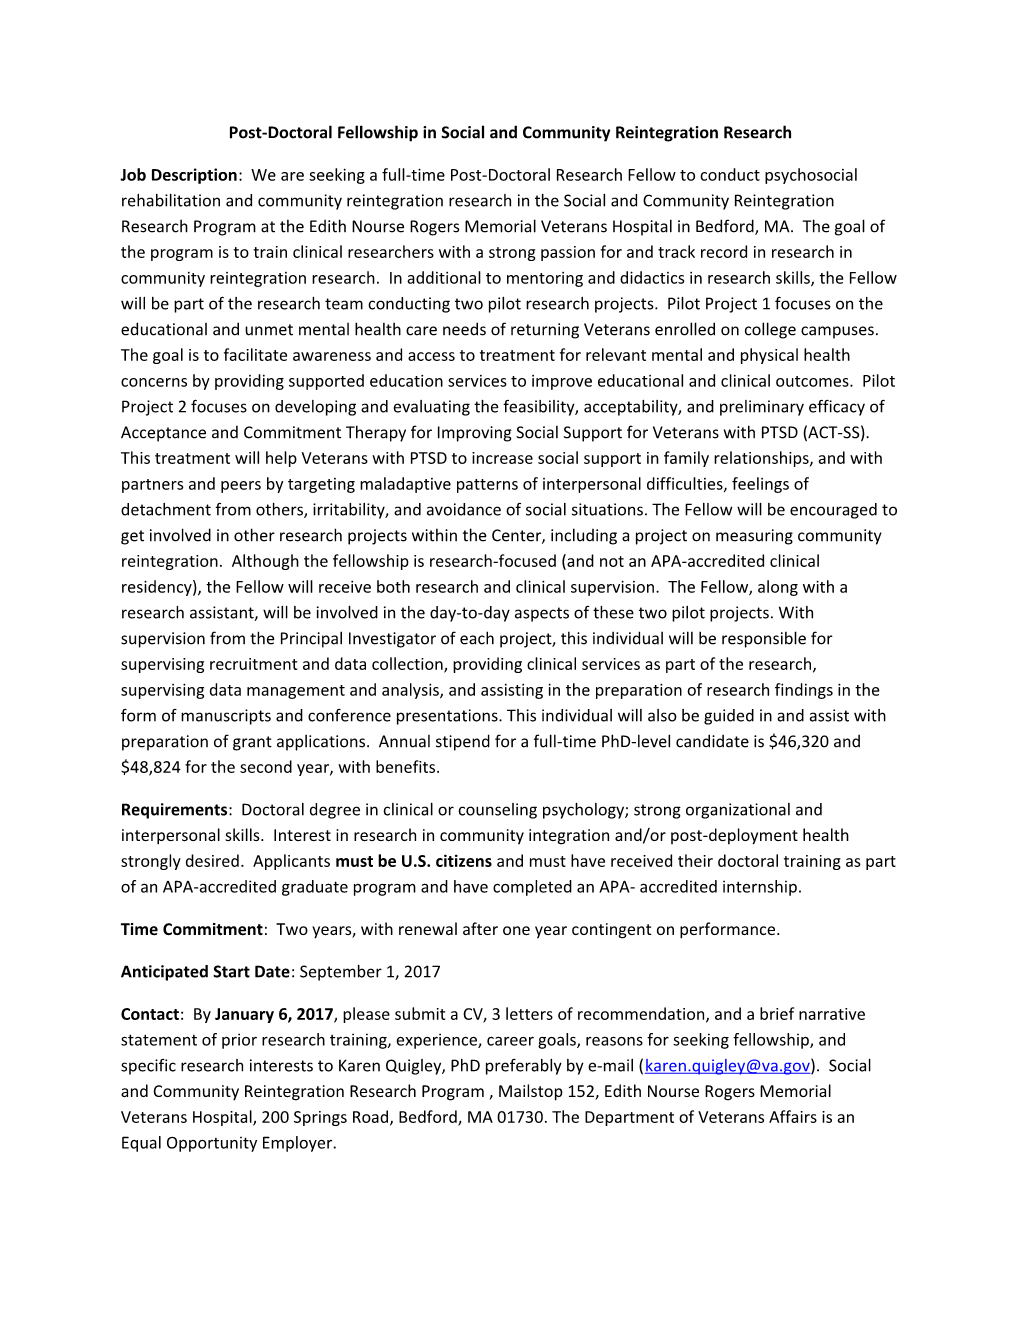 Post-Doctoral Fellowship in Social and Community Reintegration Research